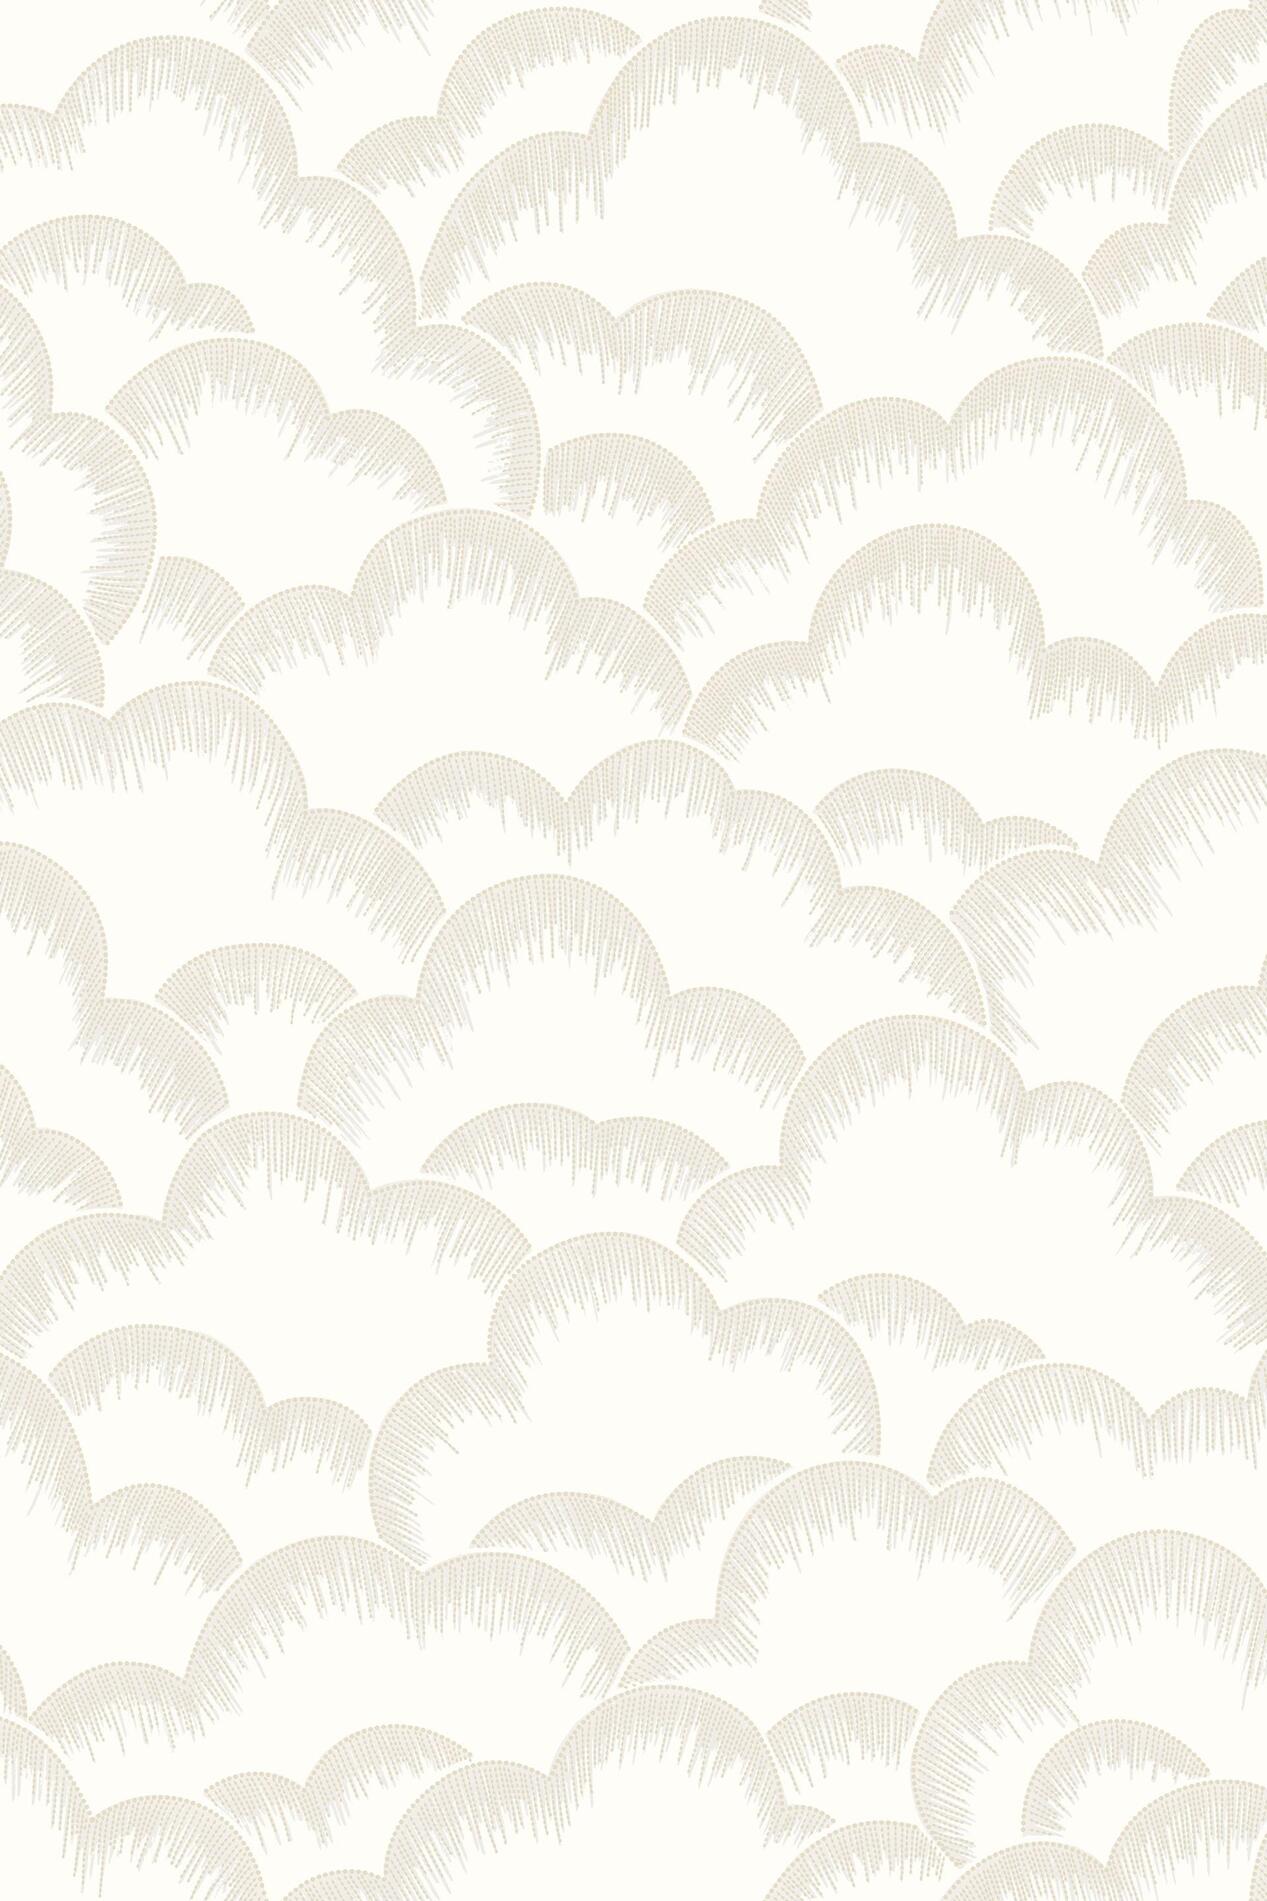 hooked-on-walls-exotique-cumulus-wallcovering-17260